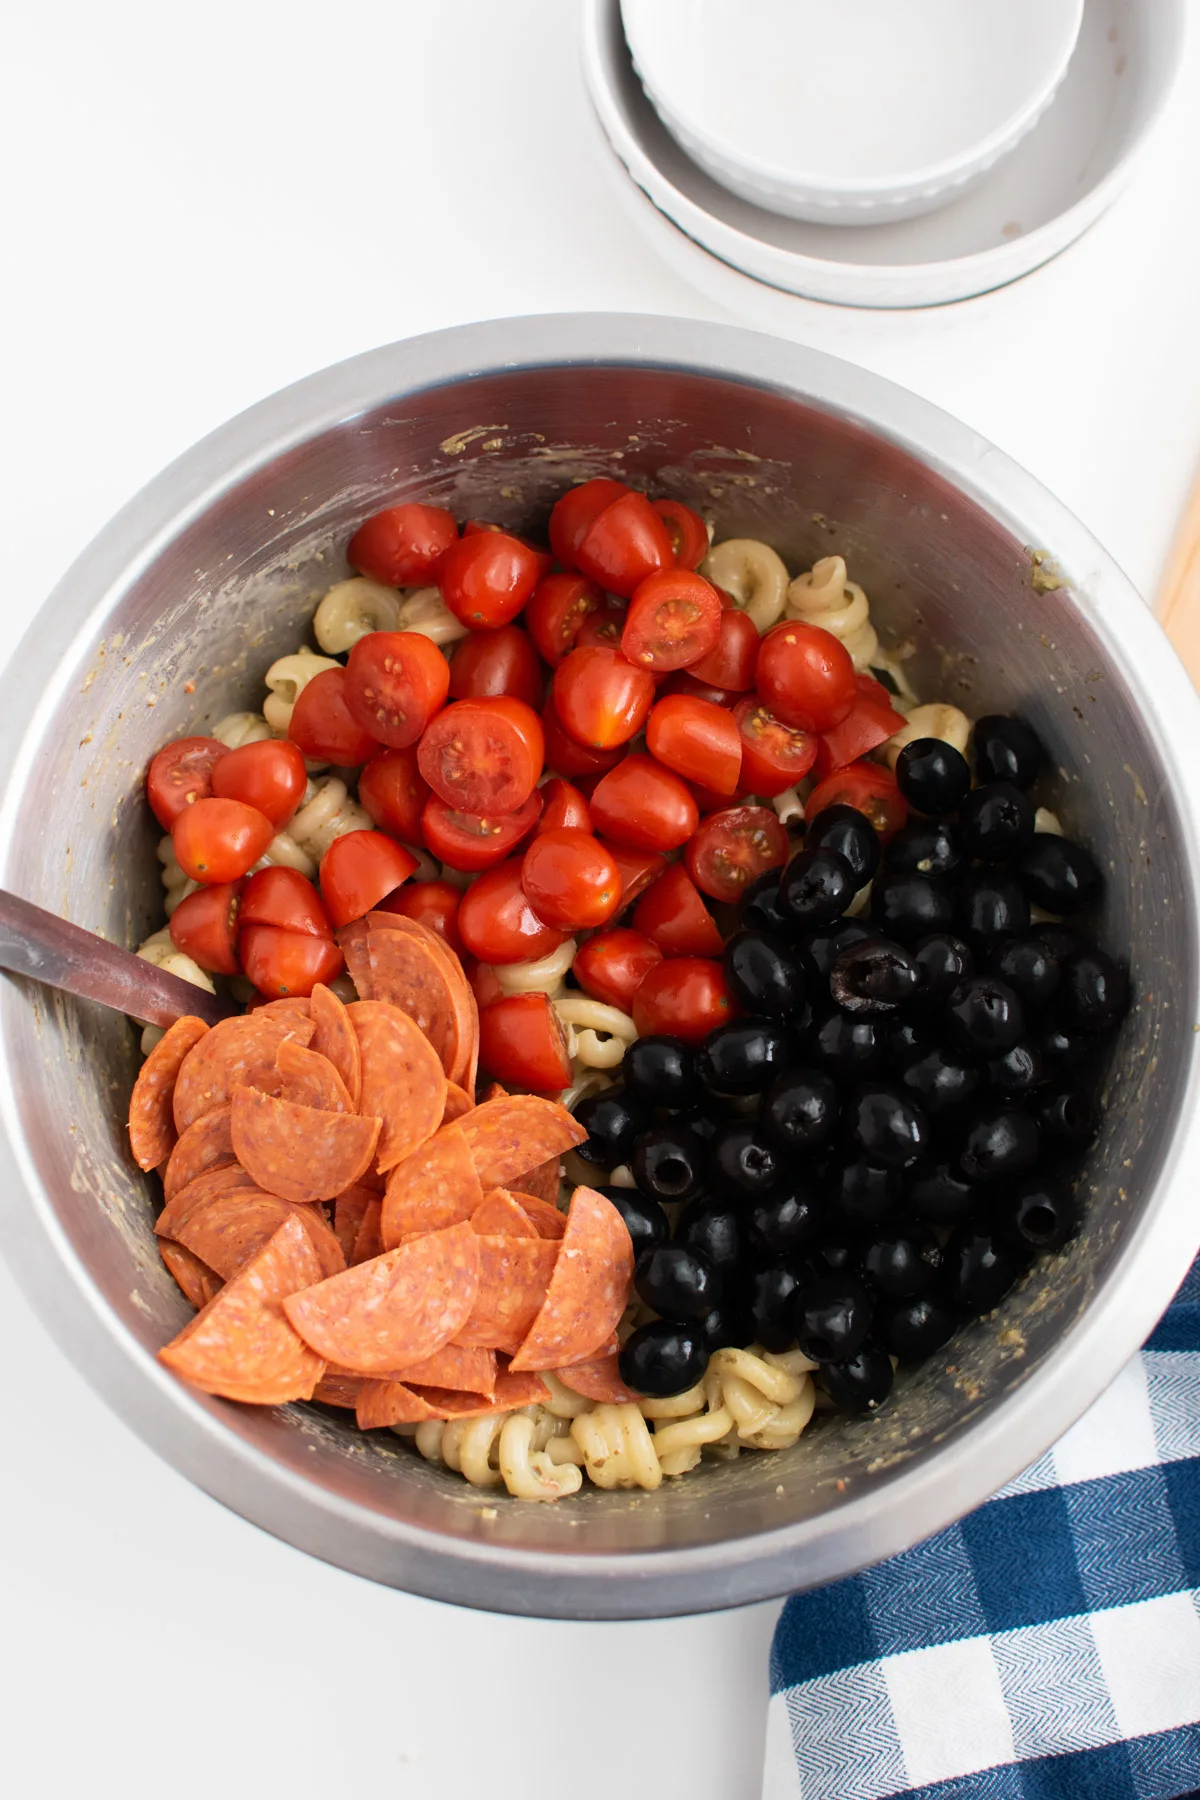 Tomatoes, olives, and pepperoni on top of pasta in large metal bowl.